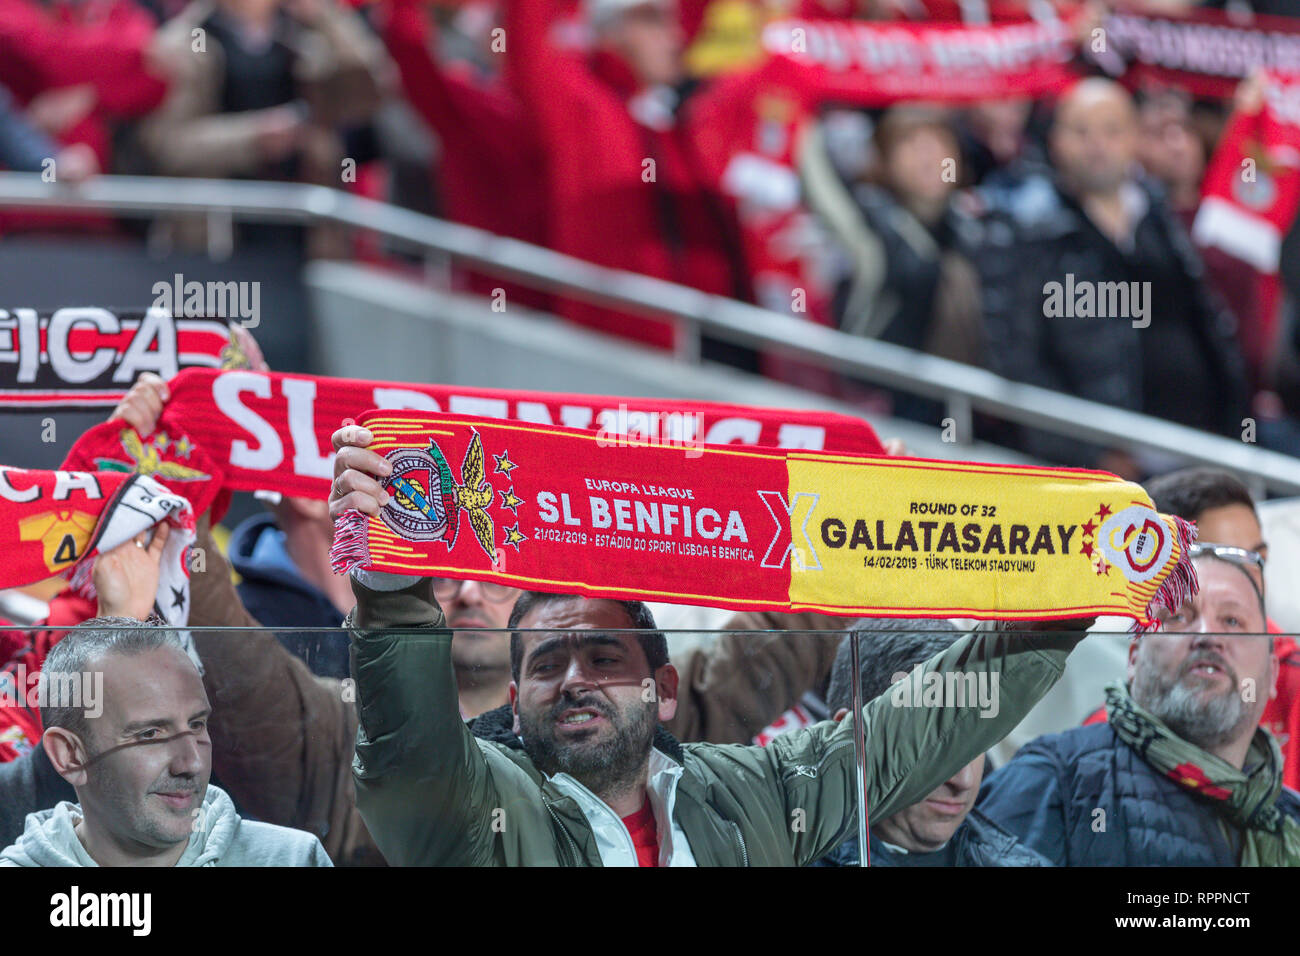 Lisbon, Portugal. 21st Feb, 2019. February 21, 2019. Lisbon, Portugal. Benfica supporter during the game of the UEFA Europa League, Round of 32, SL Benfica vs Galatasaray SK Credit: Alexandre de Sousa/Alamy Live News Stock Photo